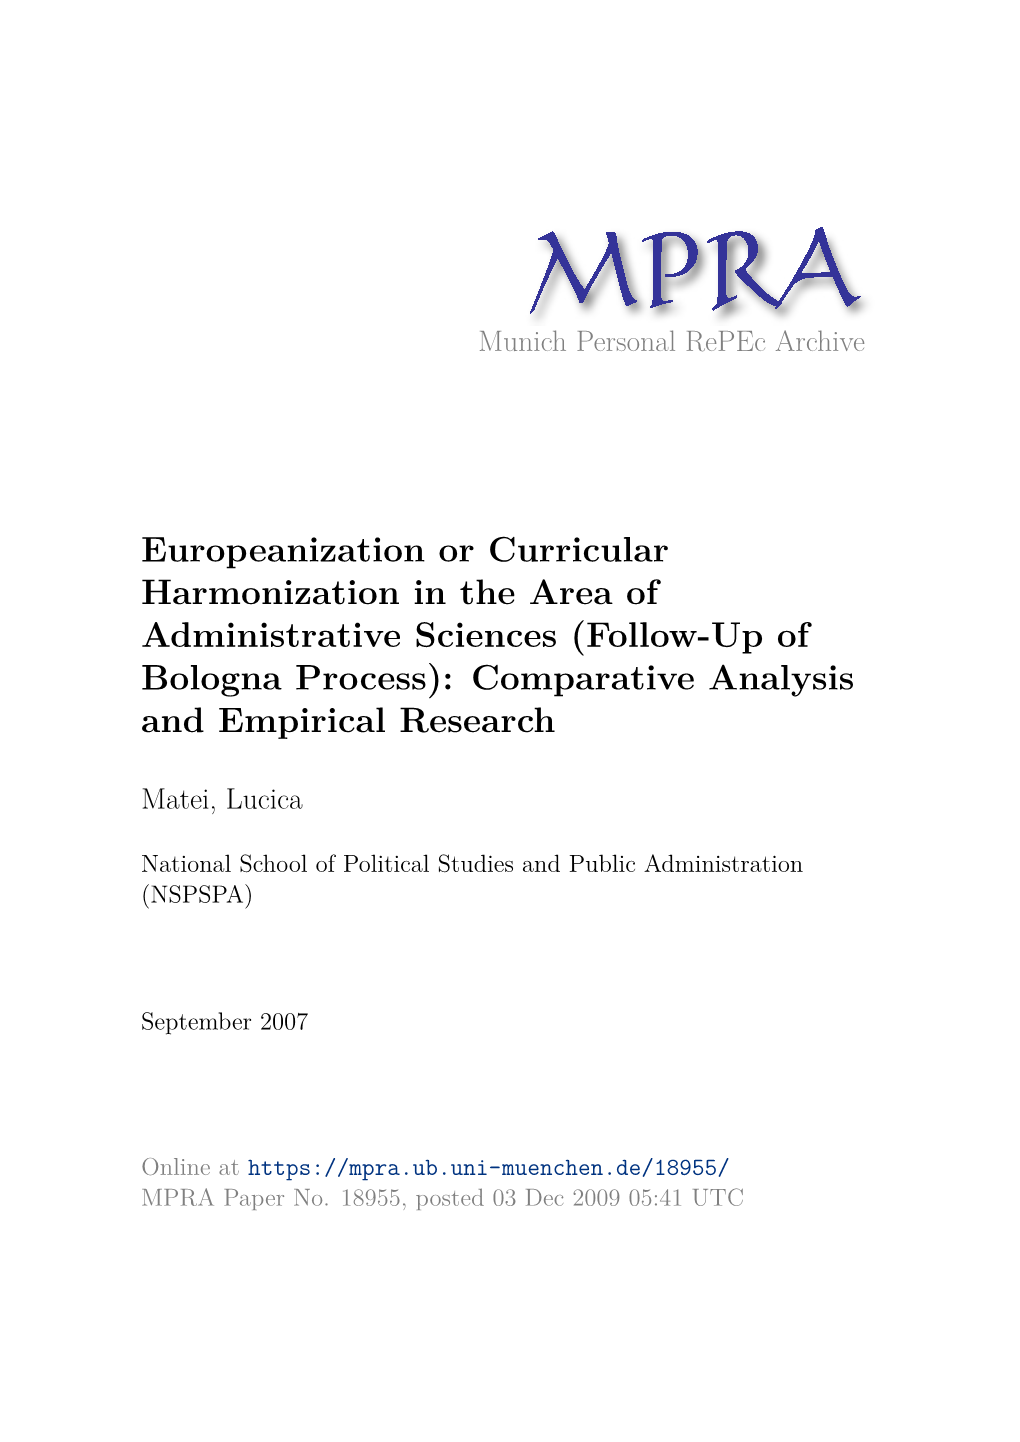 Europeanization Or Curricular Harmonization in the Area of Administrative Sciences (Follow-Up of Bologna Process): Comparative Analysis and Empirical Research